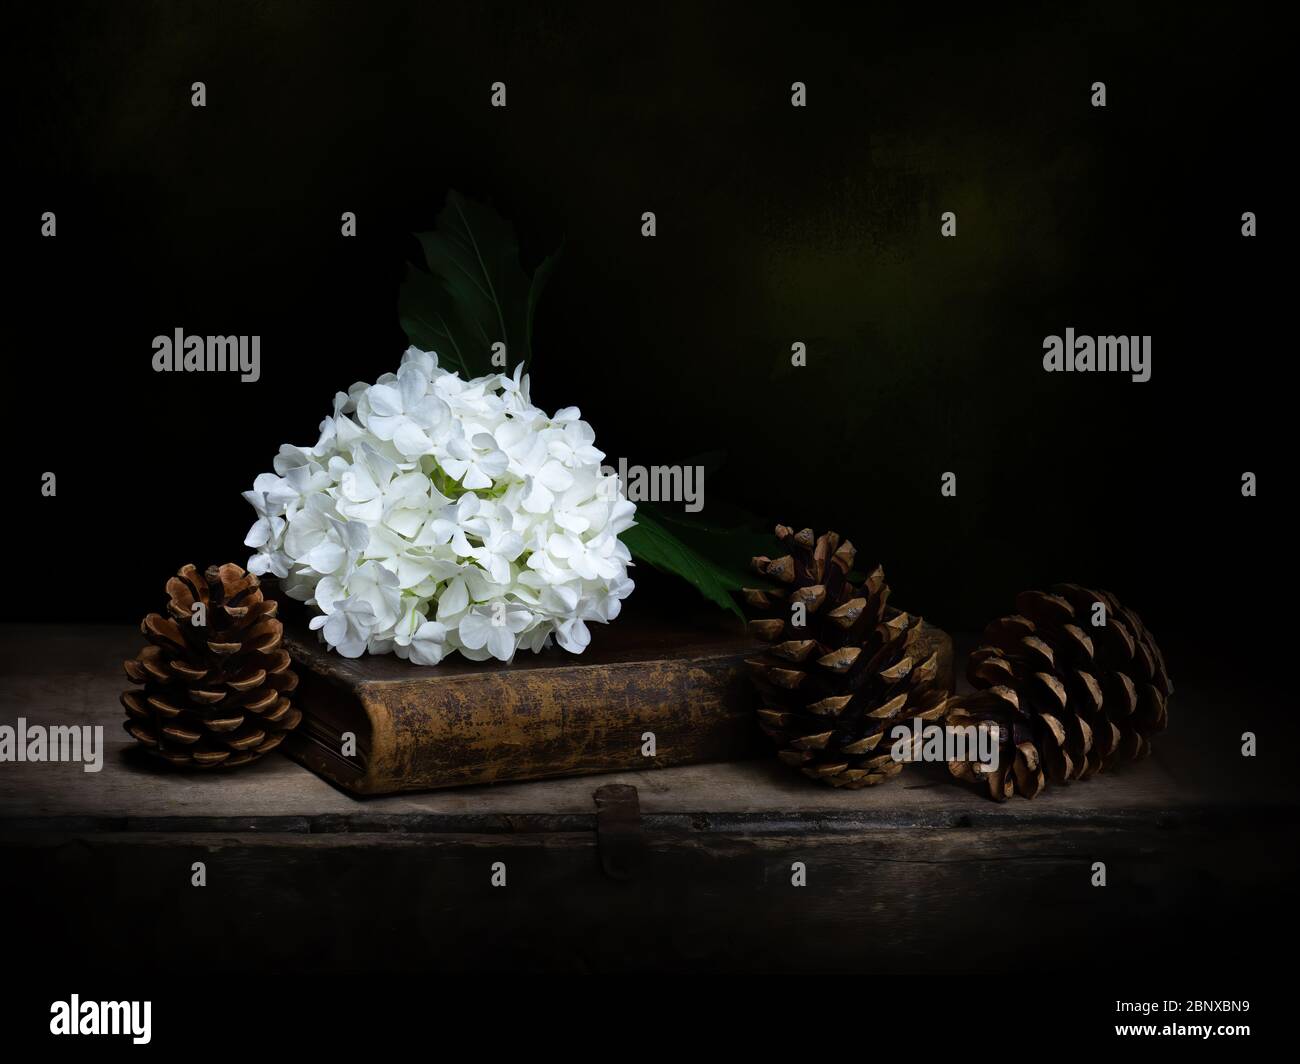 Viburnum opulus aka Snowball Tree, Guelder rose. Still life with book, pine cones. Concept, metaphor. Light painted, dark background. With copyspace Stock Photo